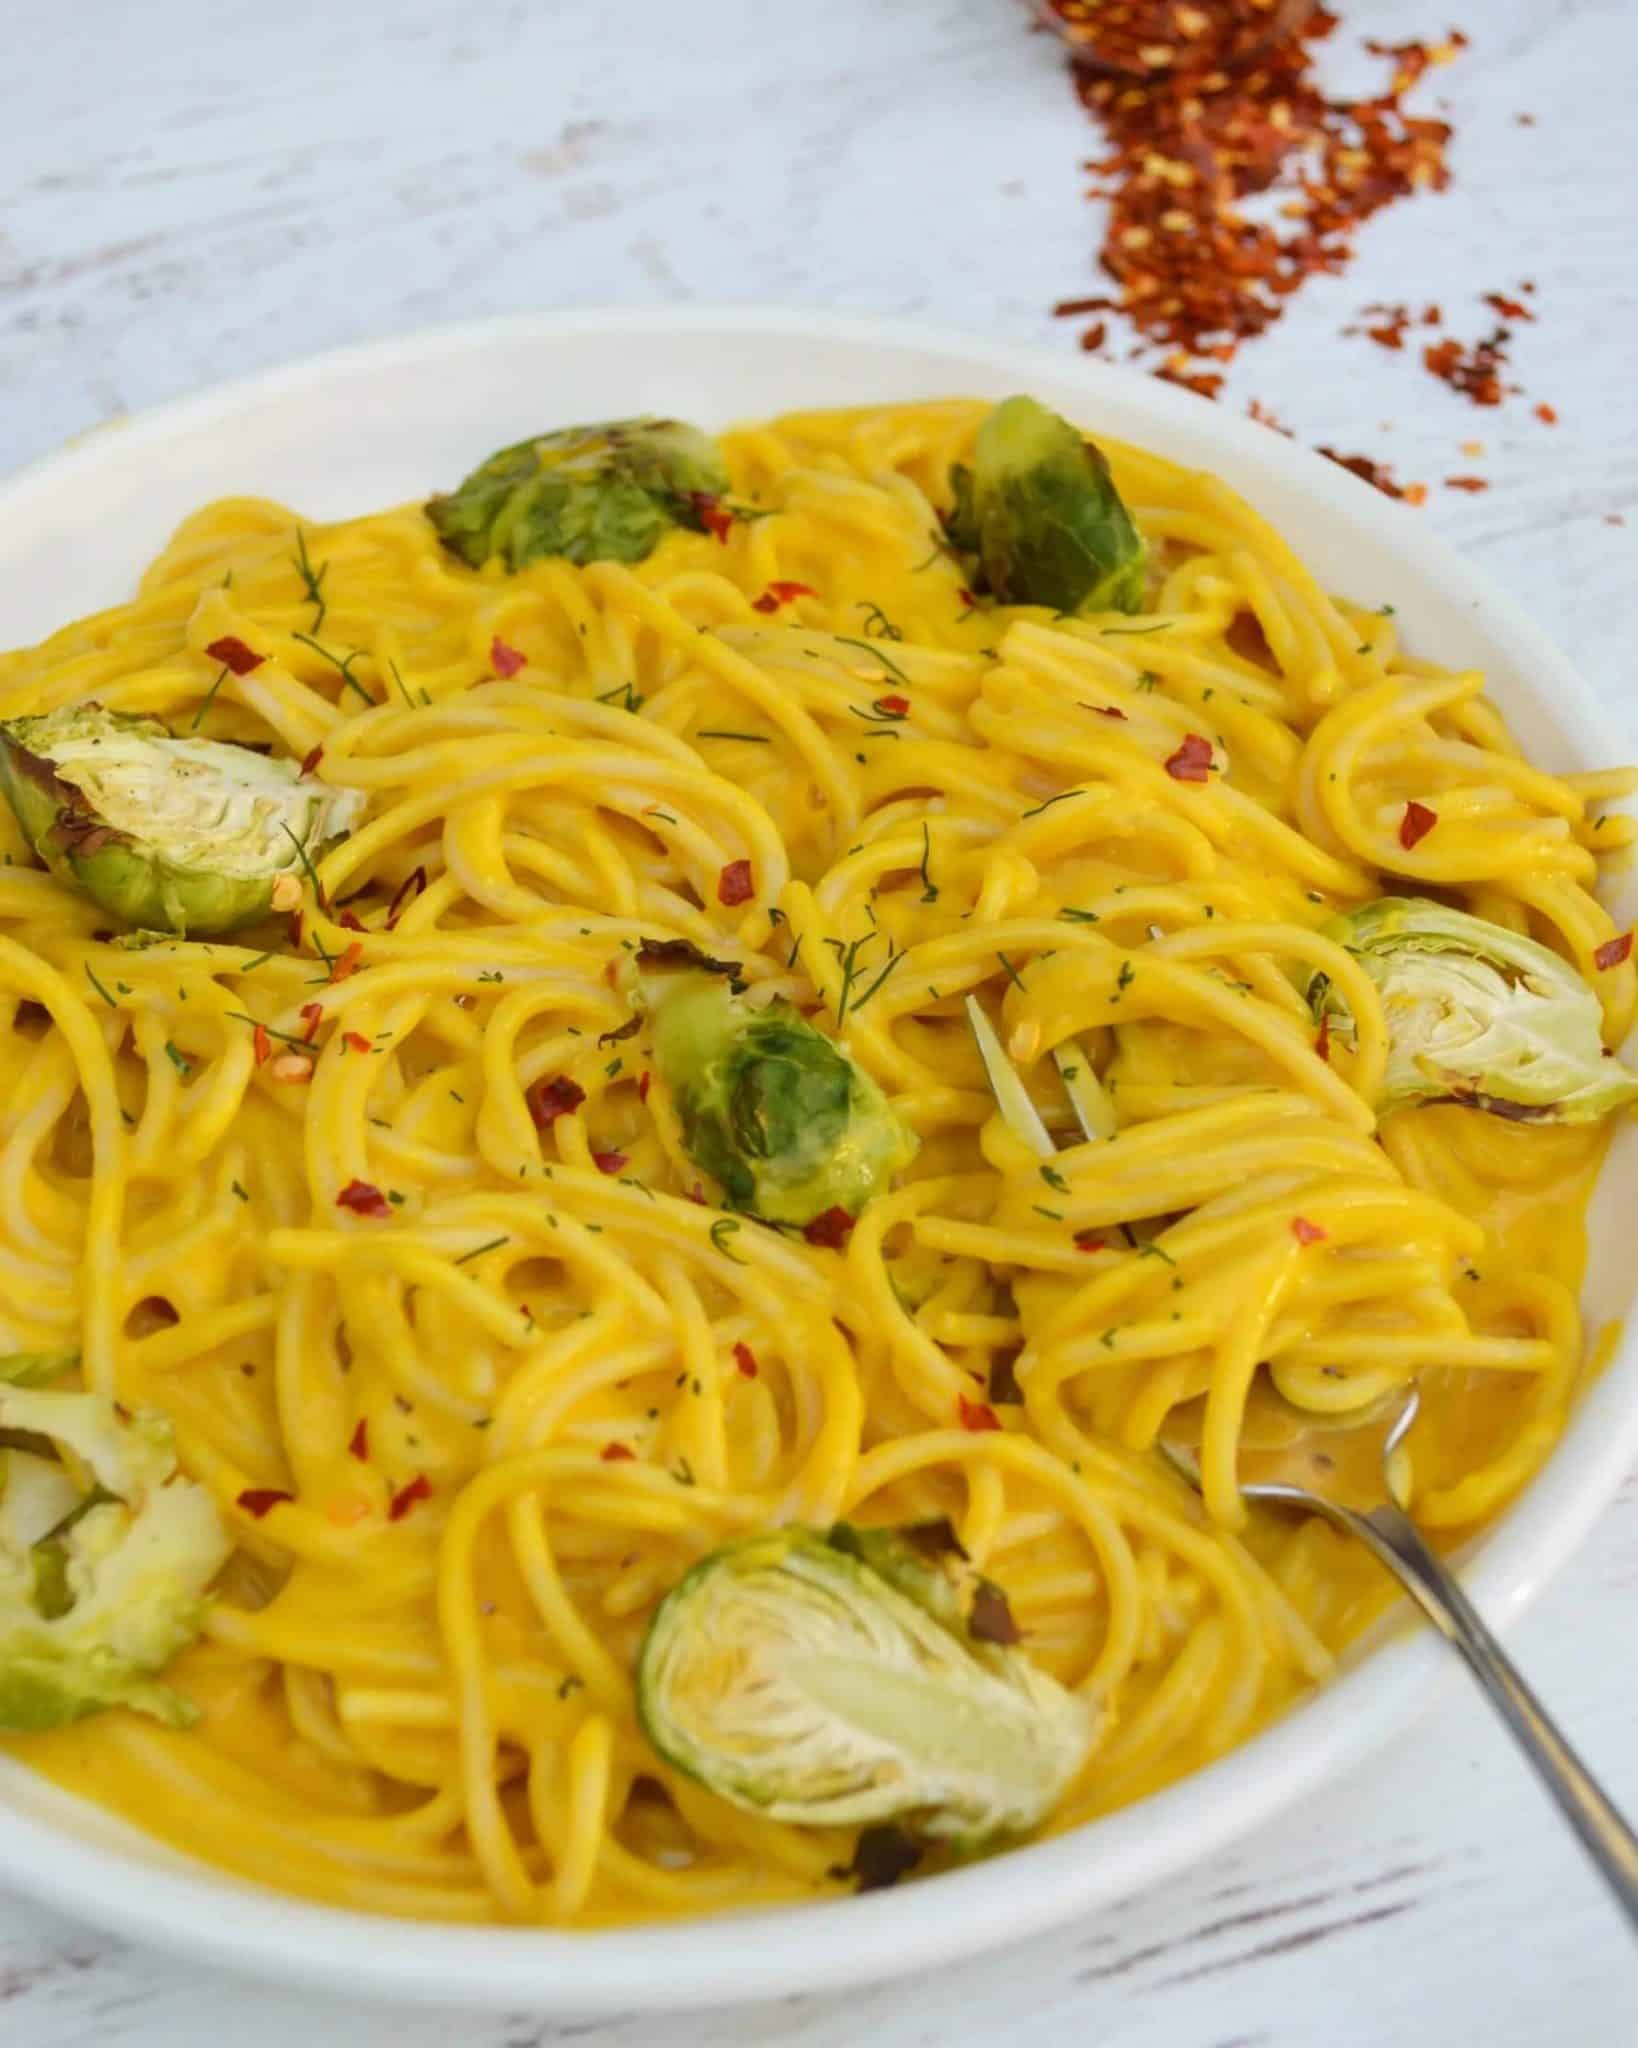 spaghetti noodles in kabocha squash sauce with brussels sprouts and red pepper flakes